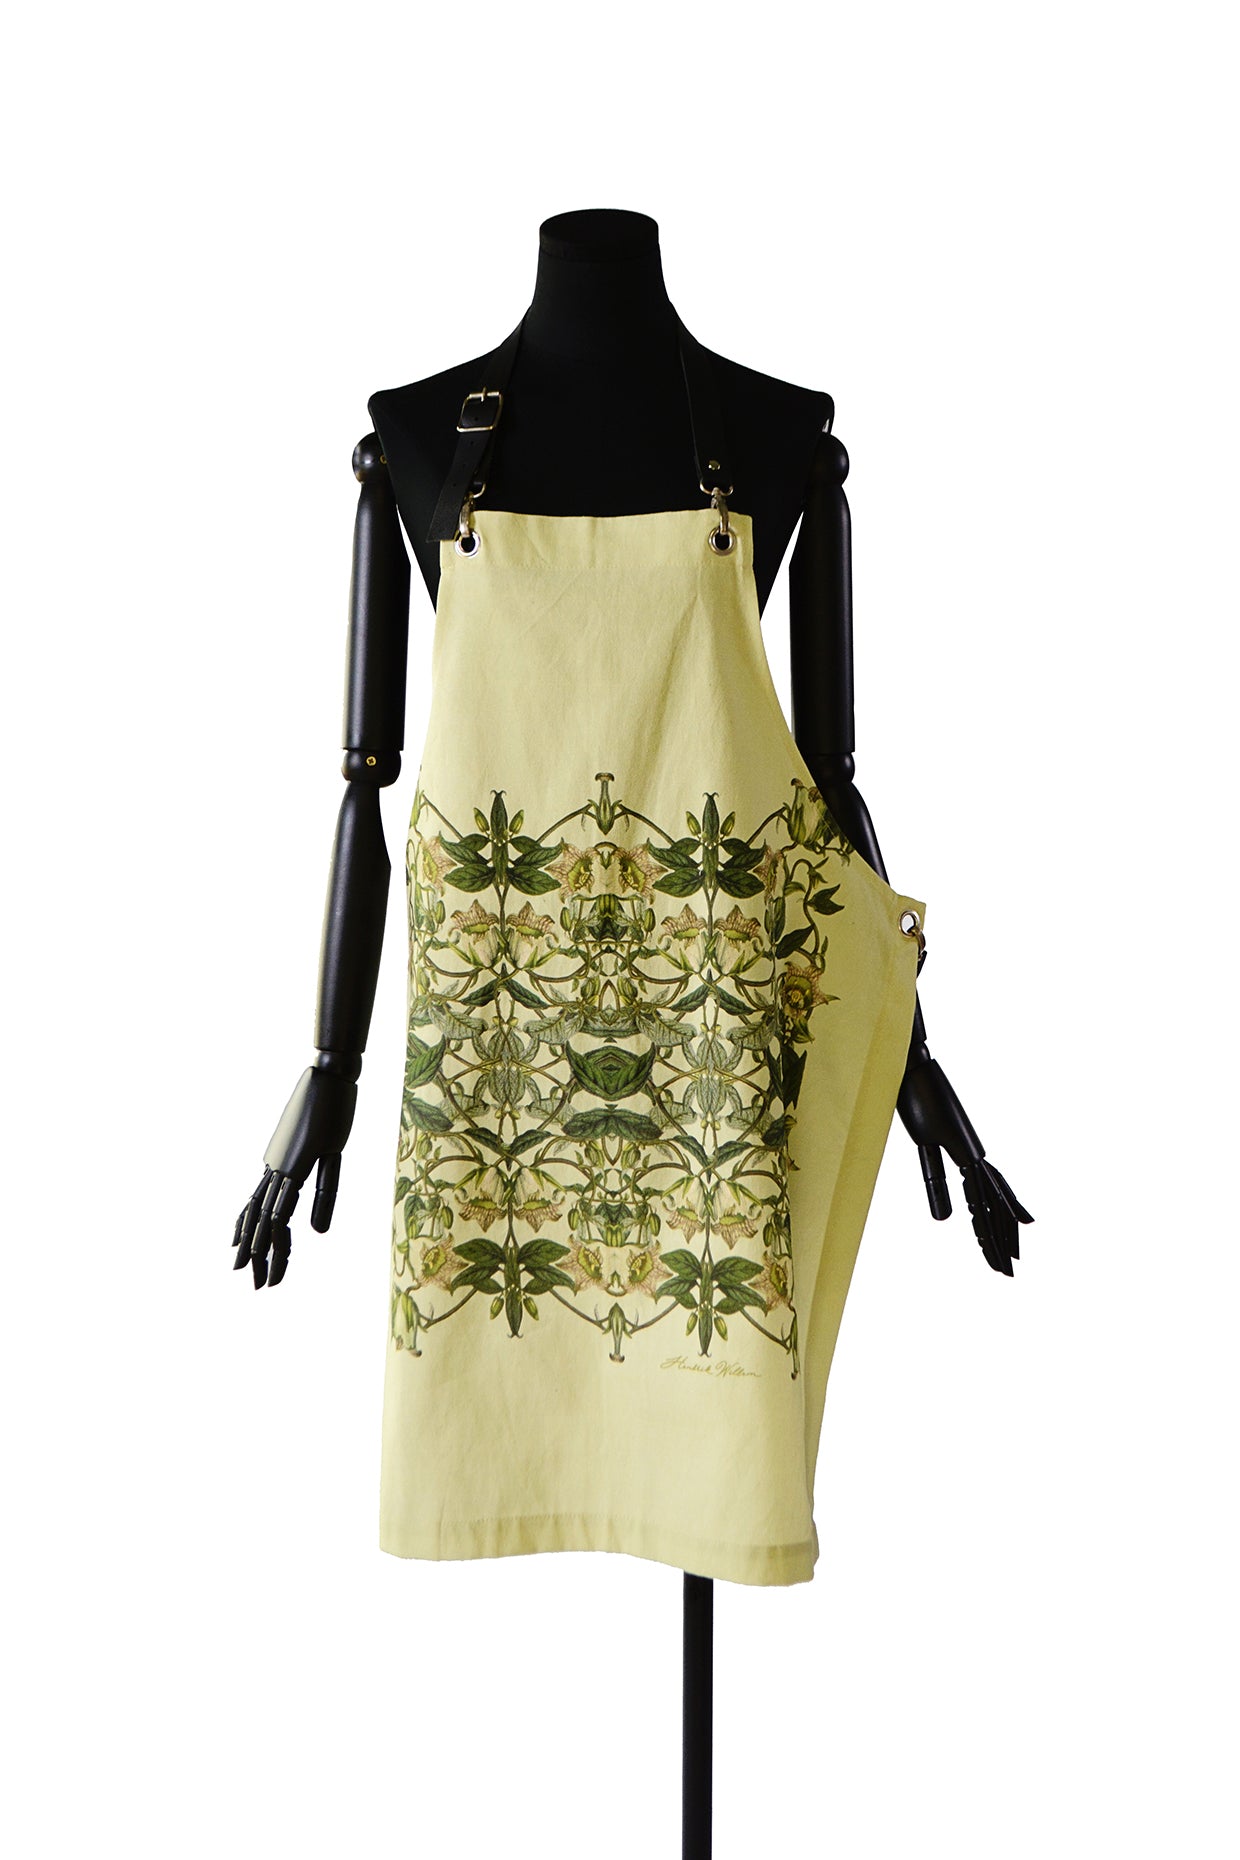 Apron with Leather Straps - Mint